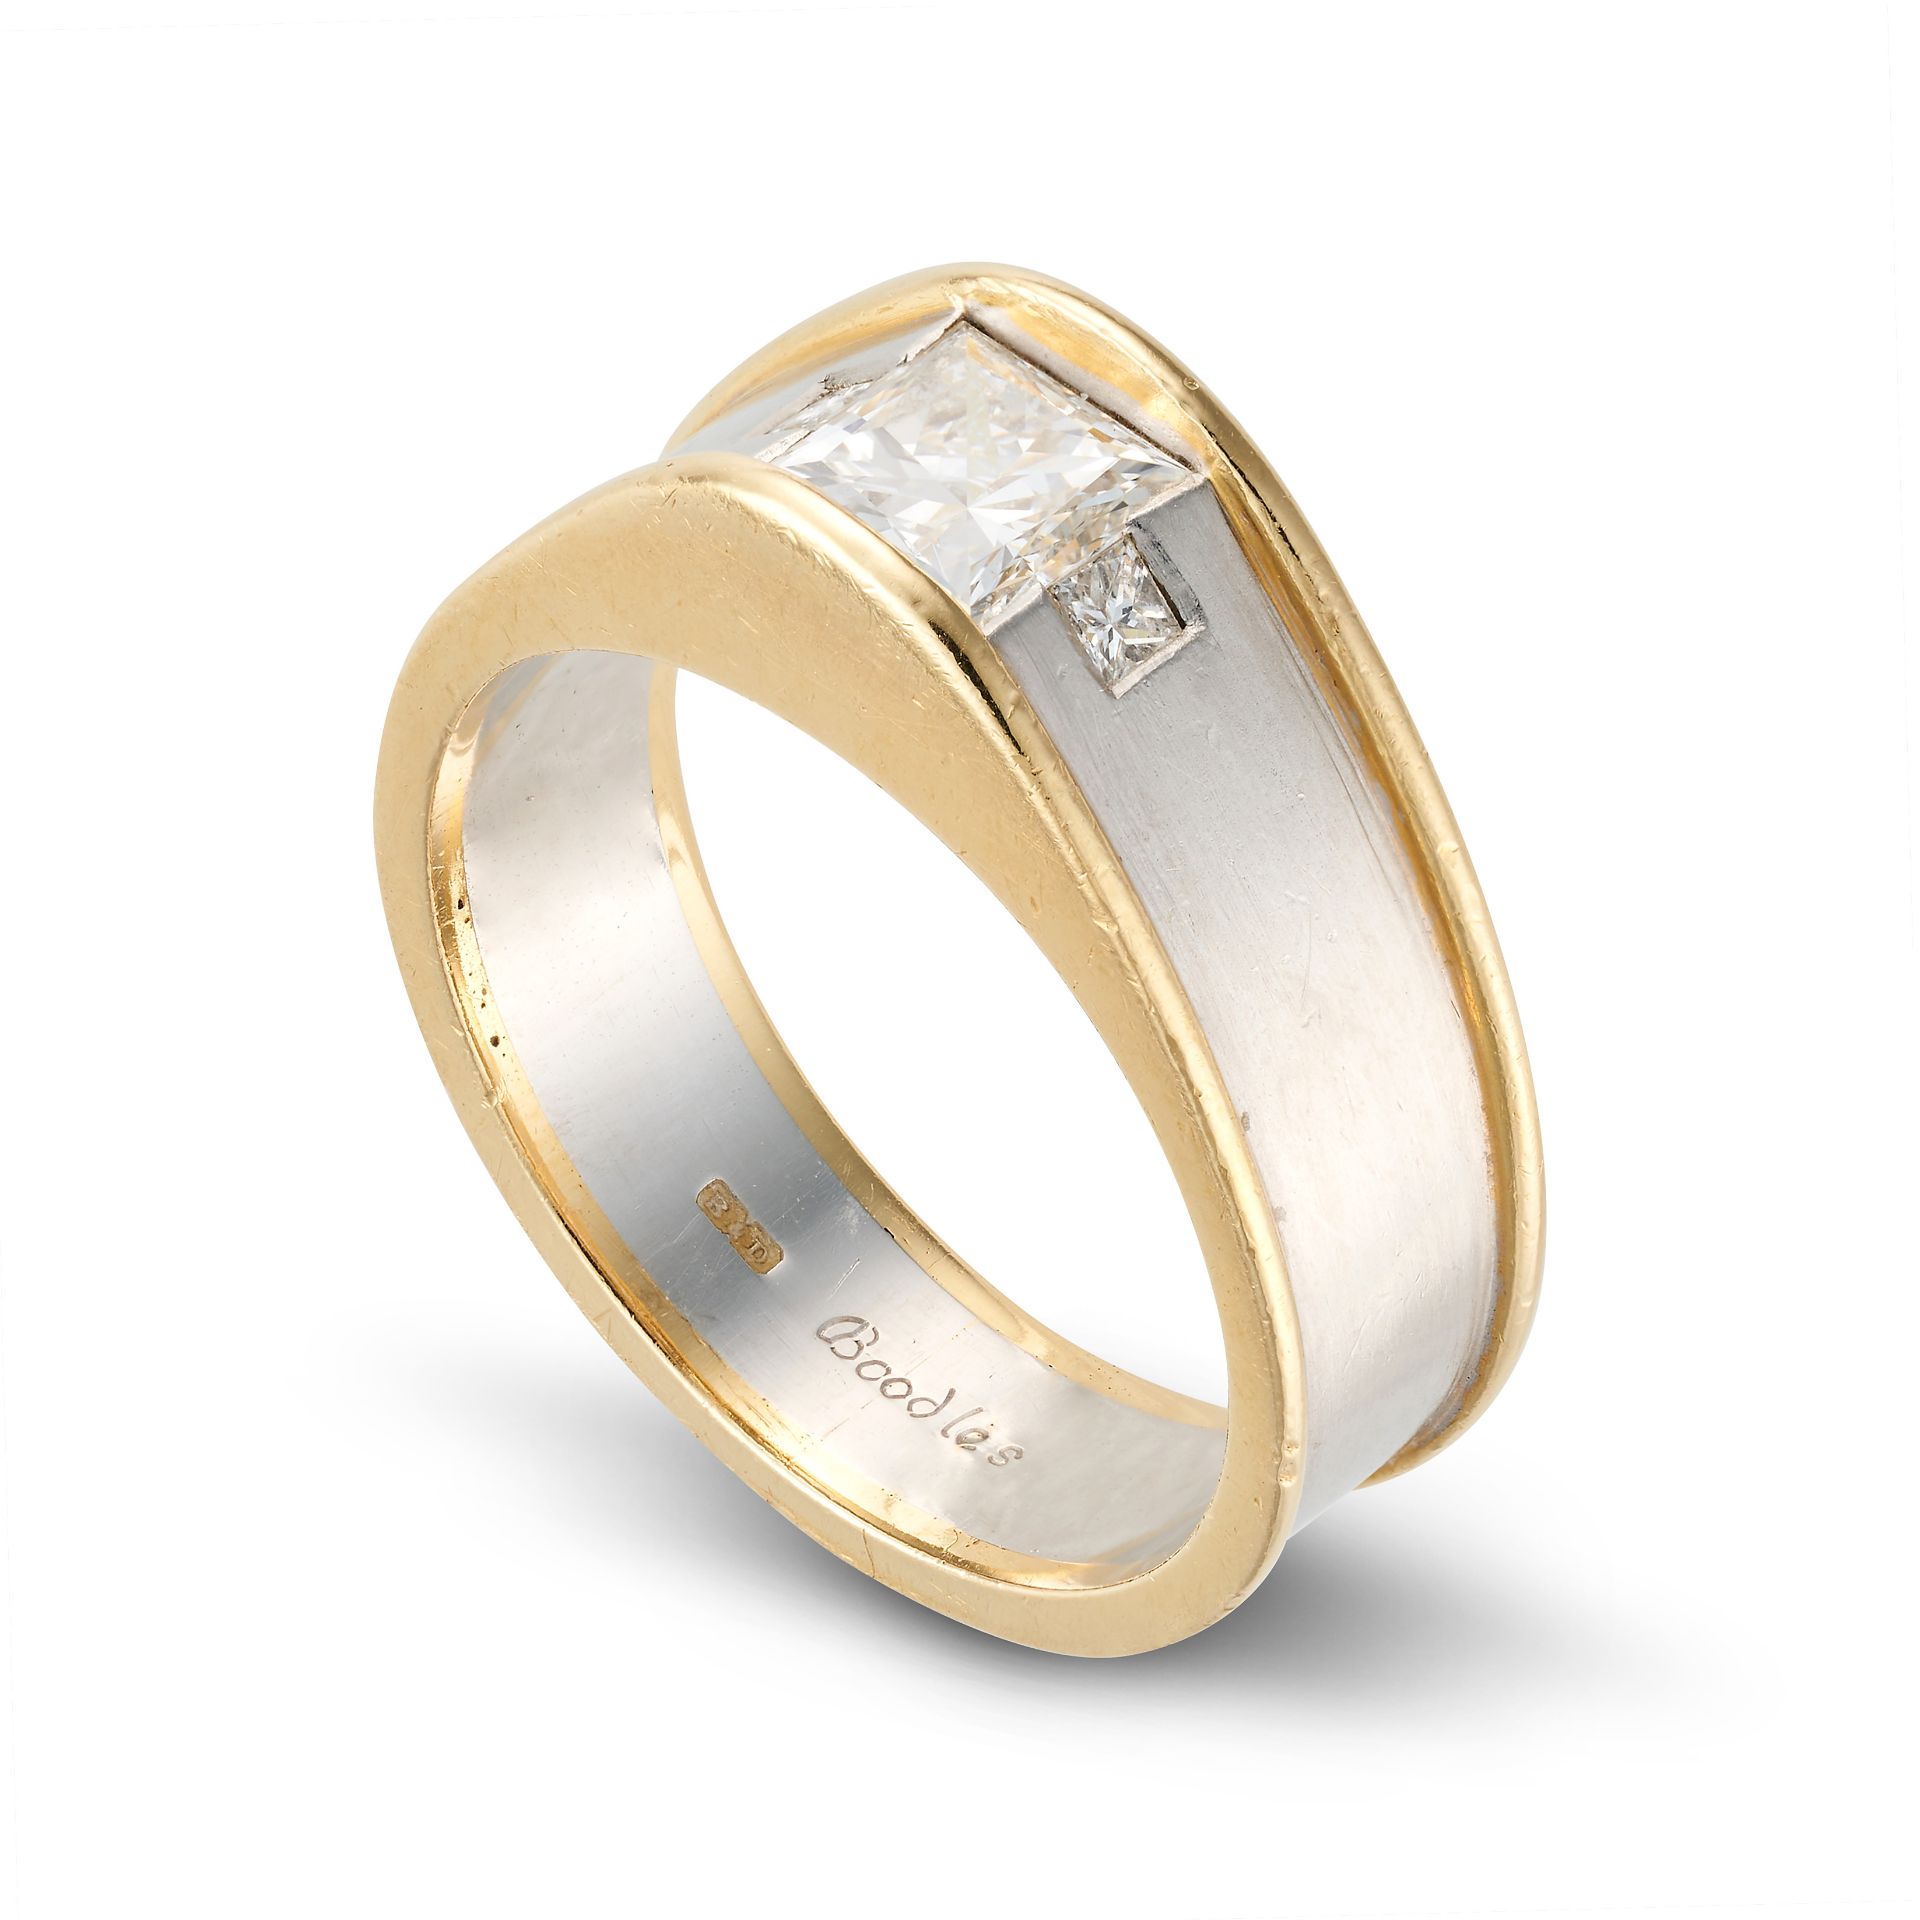 BOODLE & DUNTHORNE, A DIAMOND RING in 18ct white and yellow gold, set with a princess cut diamond... - Bild 2 aus 2